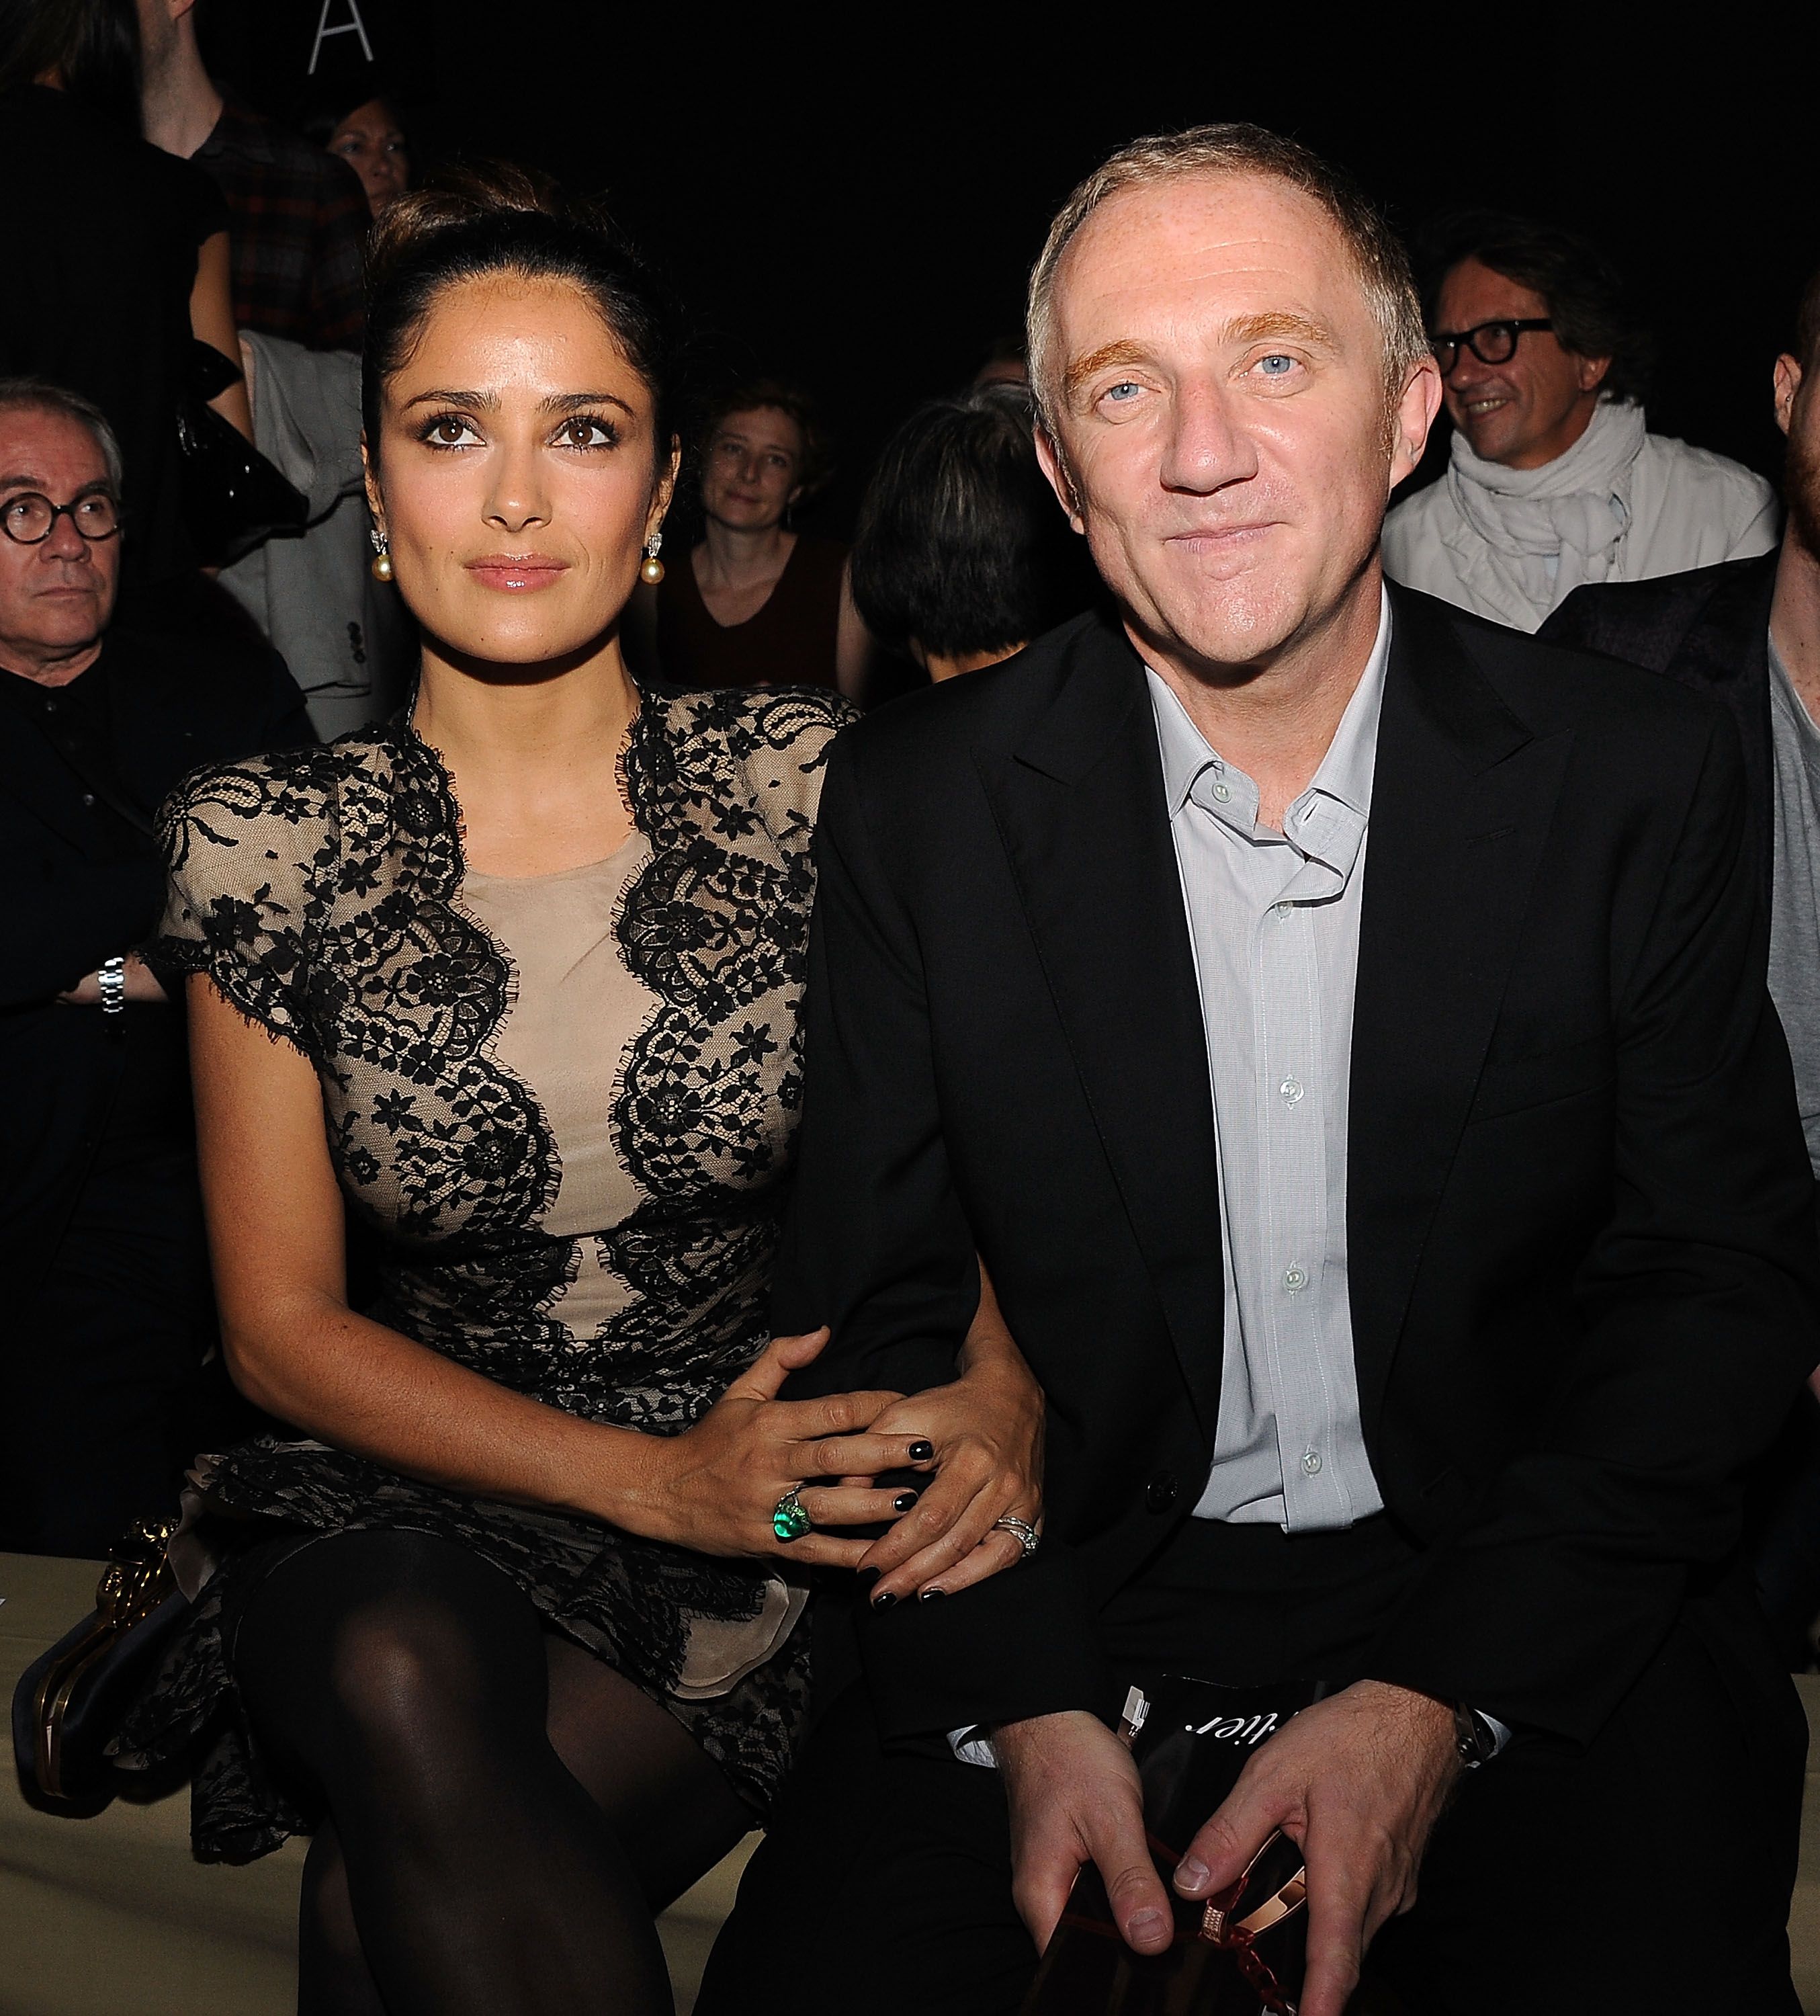 Salma Hayek and Francois-Henri Pinault during the Alexander McQueen Ready to Wear Spring/Summer show during Paris Fashion Week on October 5, 2010, in France. | Source: Getty Images